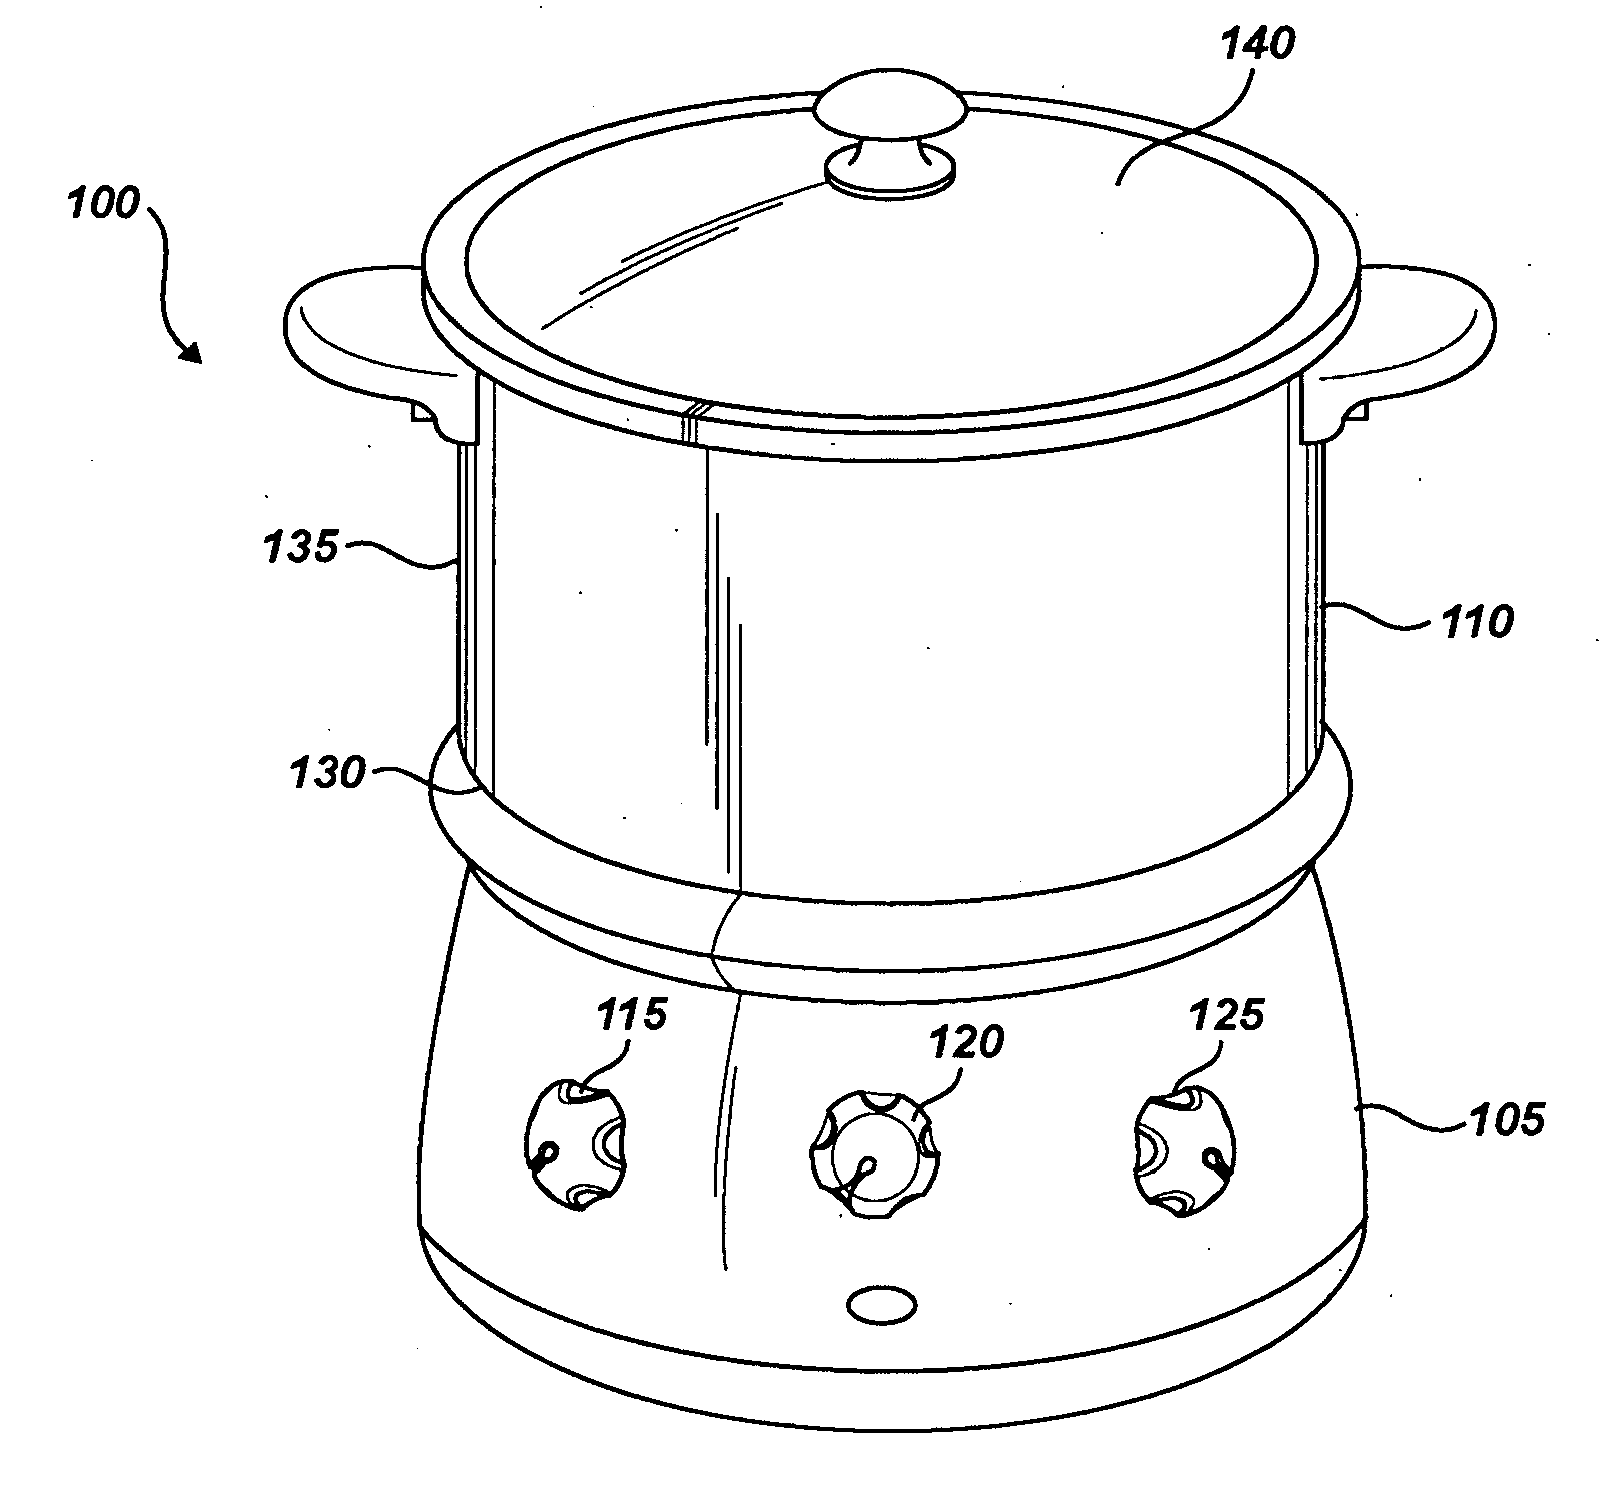 Self stirring, heating and cooking assembly having interchangeable stirring devices